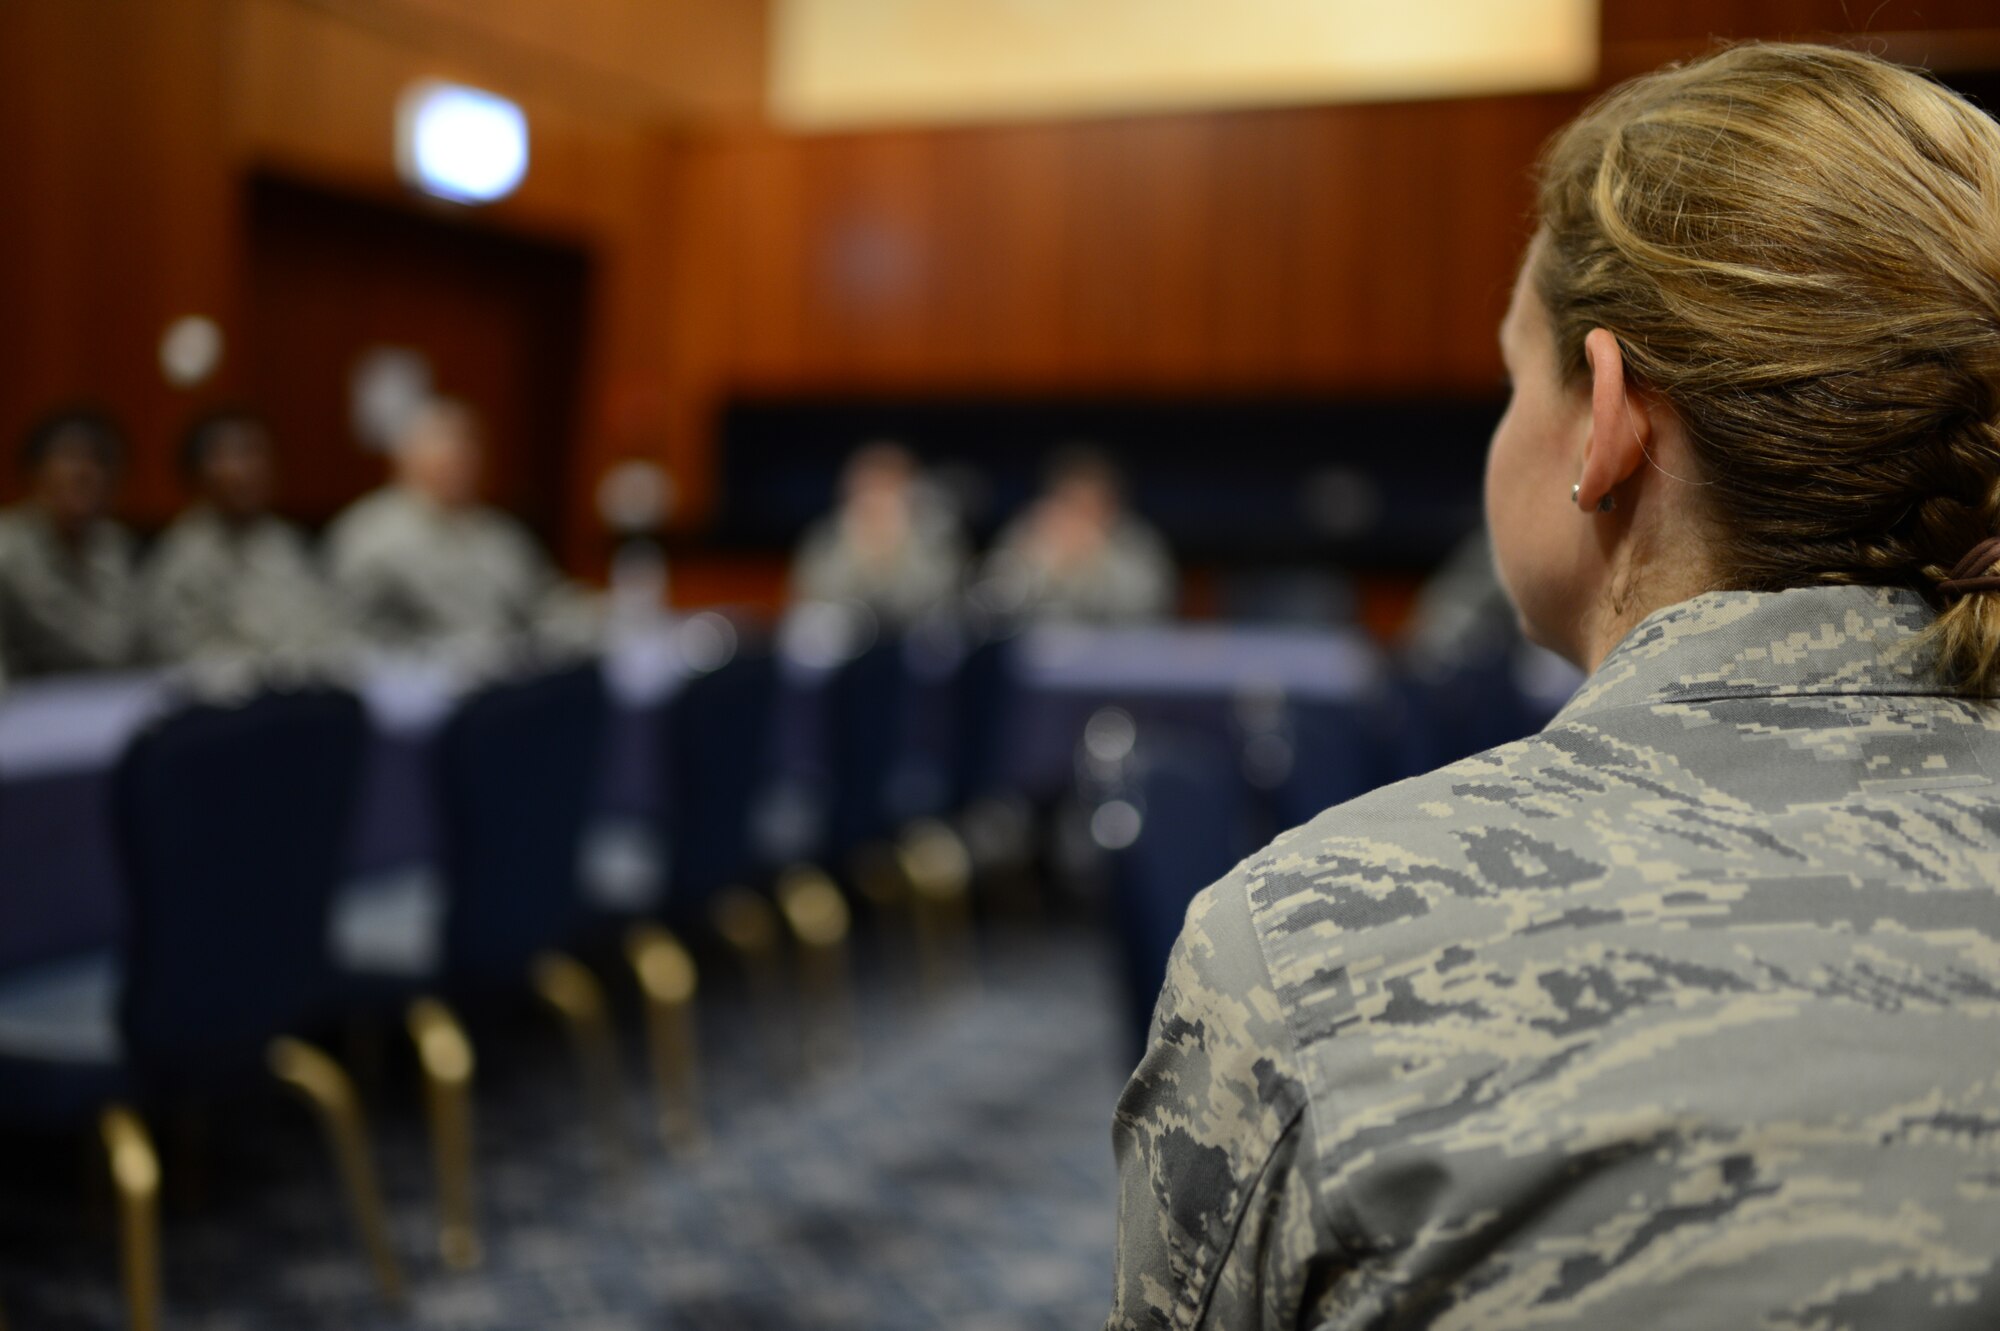 SPANGDAHLEM AIR BASE, Germany – Small groups of Airmen speak with representatives from the Air Force Sexual Assault Prevention & Response Headquarters, located in the Pentagon, as part of an Air Force-wide focus group in combating sexual assault Sept. 26, 2013. The focus group was hosted by 14 bases across four major commands and Spangdahlem was their final stop. (U.S. Air Force photo by Airman 1st Class Gustavo Castillo/Released)